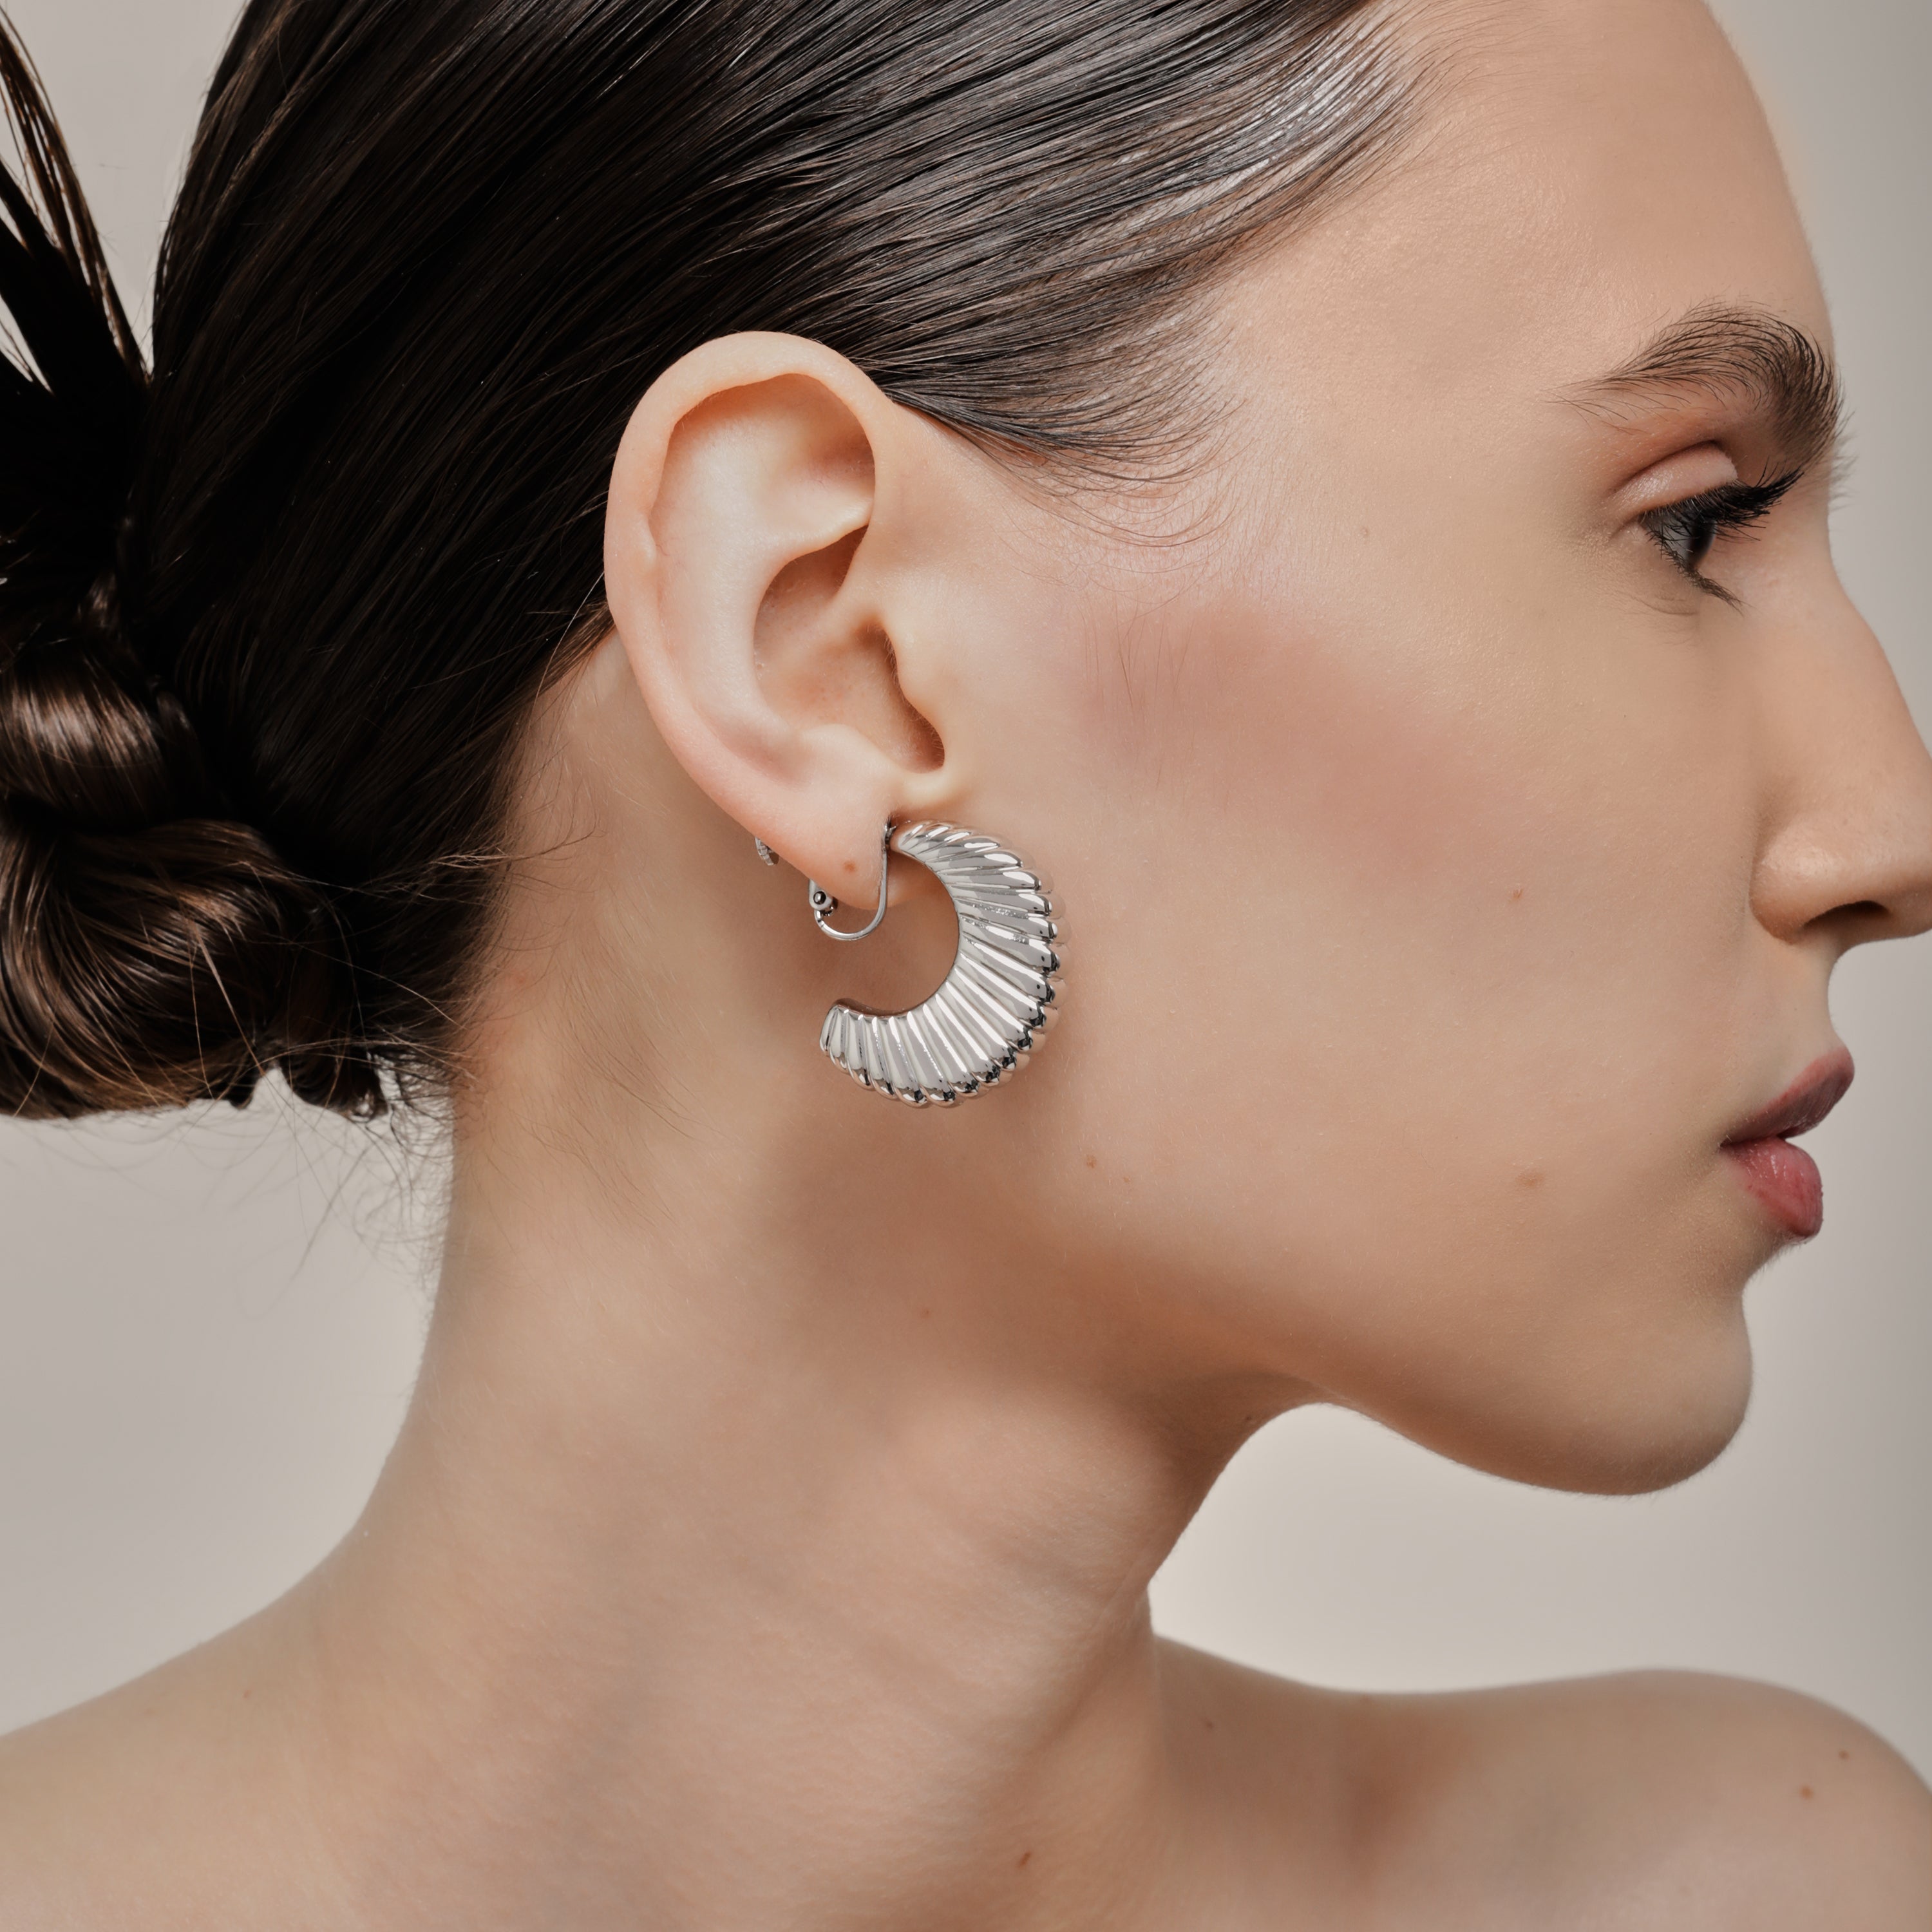 A model wearing the Deco Hoop Clip On Earrings in Silver. Designed with a screwback closure, these earrings provide a secure hold for all types of ears. Whether you have thick, sensitive, small, or keloid prone ears, these earrings can be manually adjusted to fit your size. Enjoy 8-12 hours of wear in these elegant, versatile earrings.